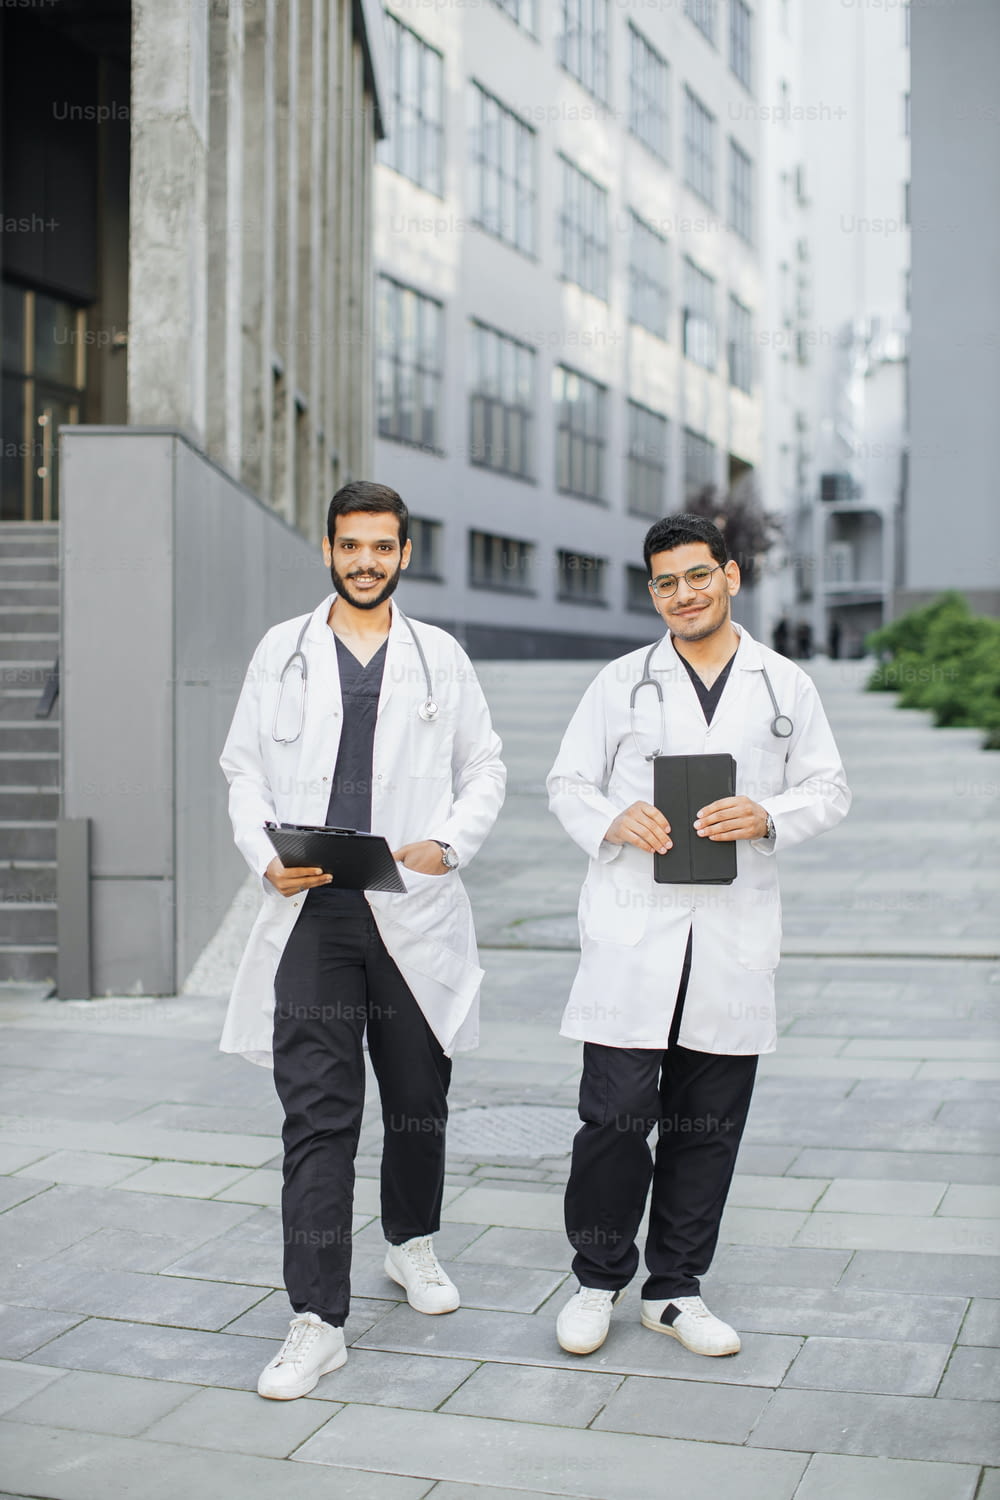 Team of two young handsome Saudi Arabian male doctors smiling outside hospital, walking with tablet pc and clipboard in hands. Full length portrait of two male medical students in white coat outdoors